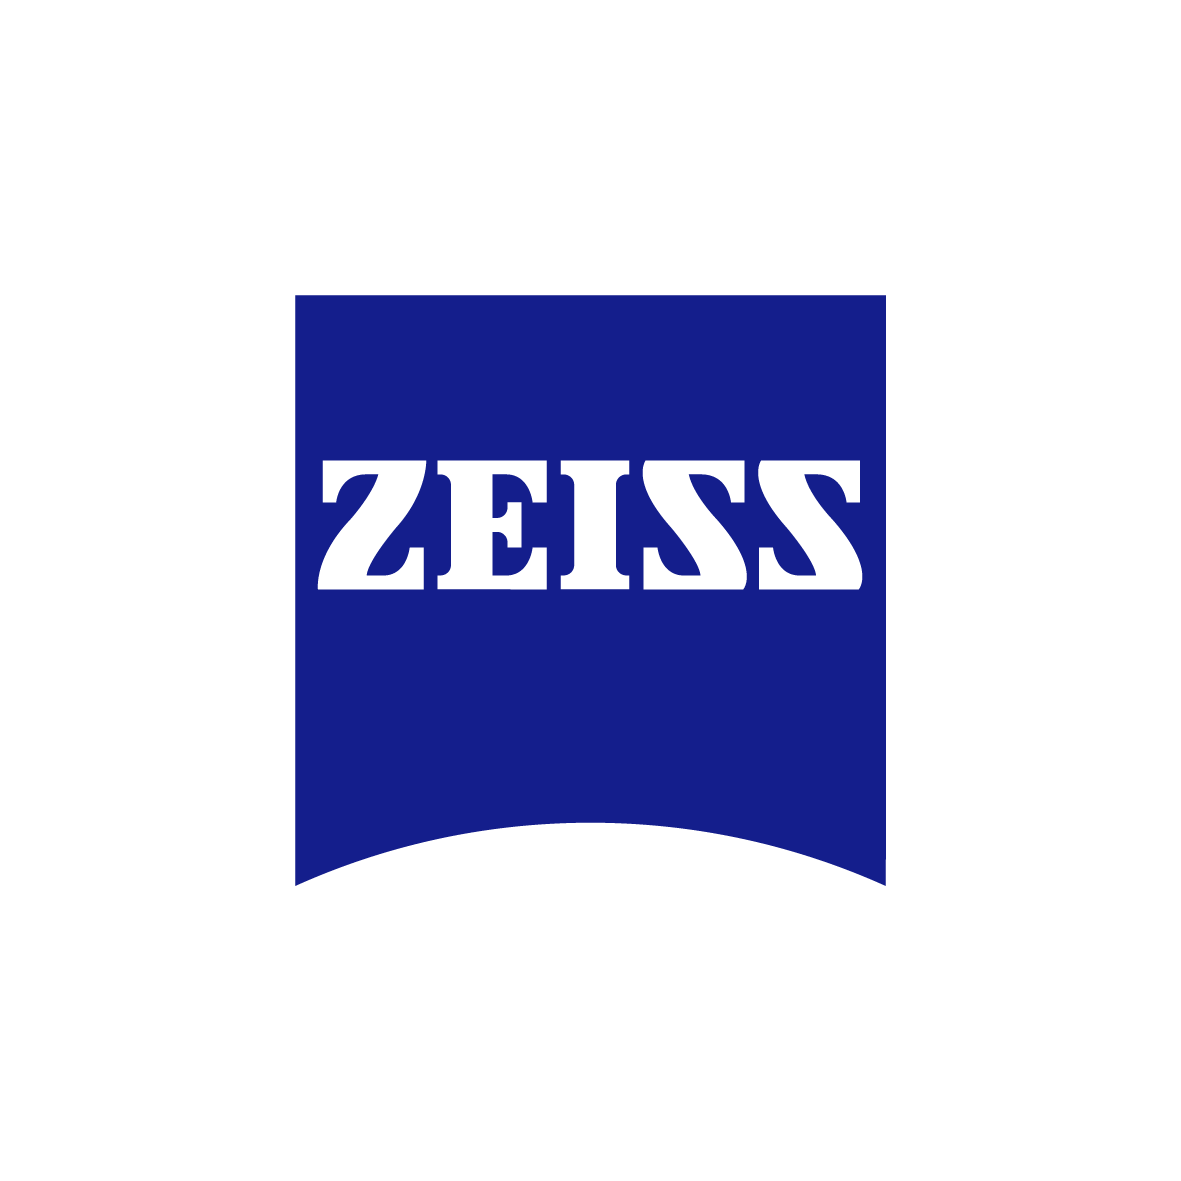 zeiss-logo-rgb.png